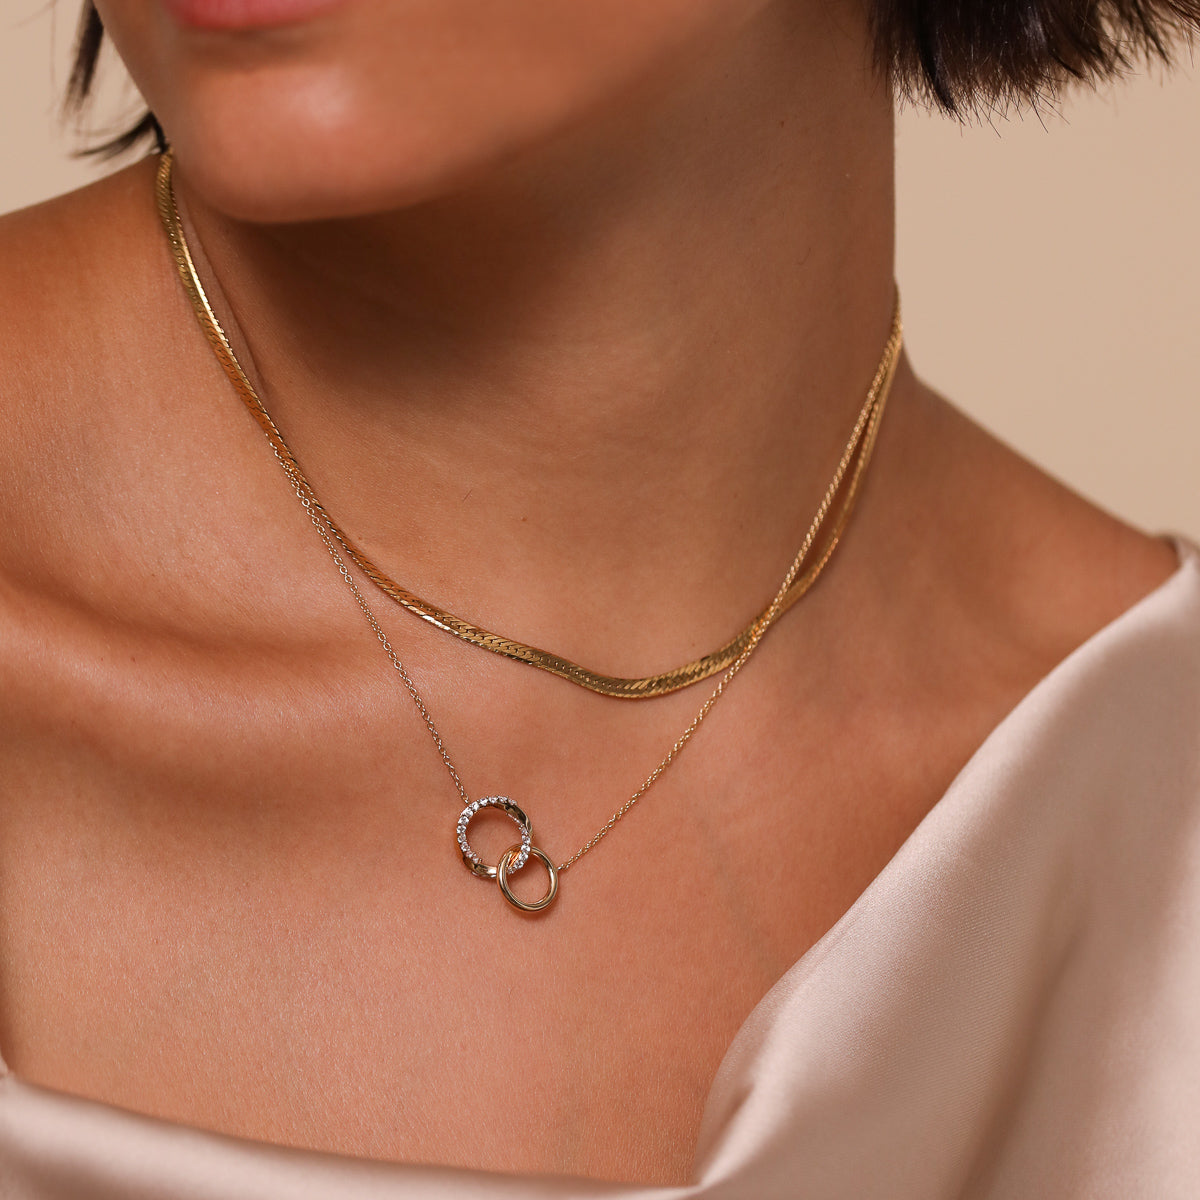 Orbit Crystal Chain Necklace in Gold worn with Snake Chain Necklace in Gold